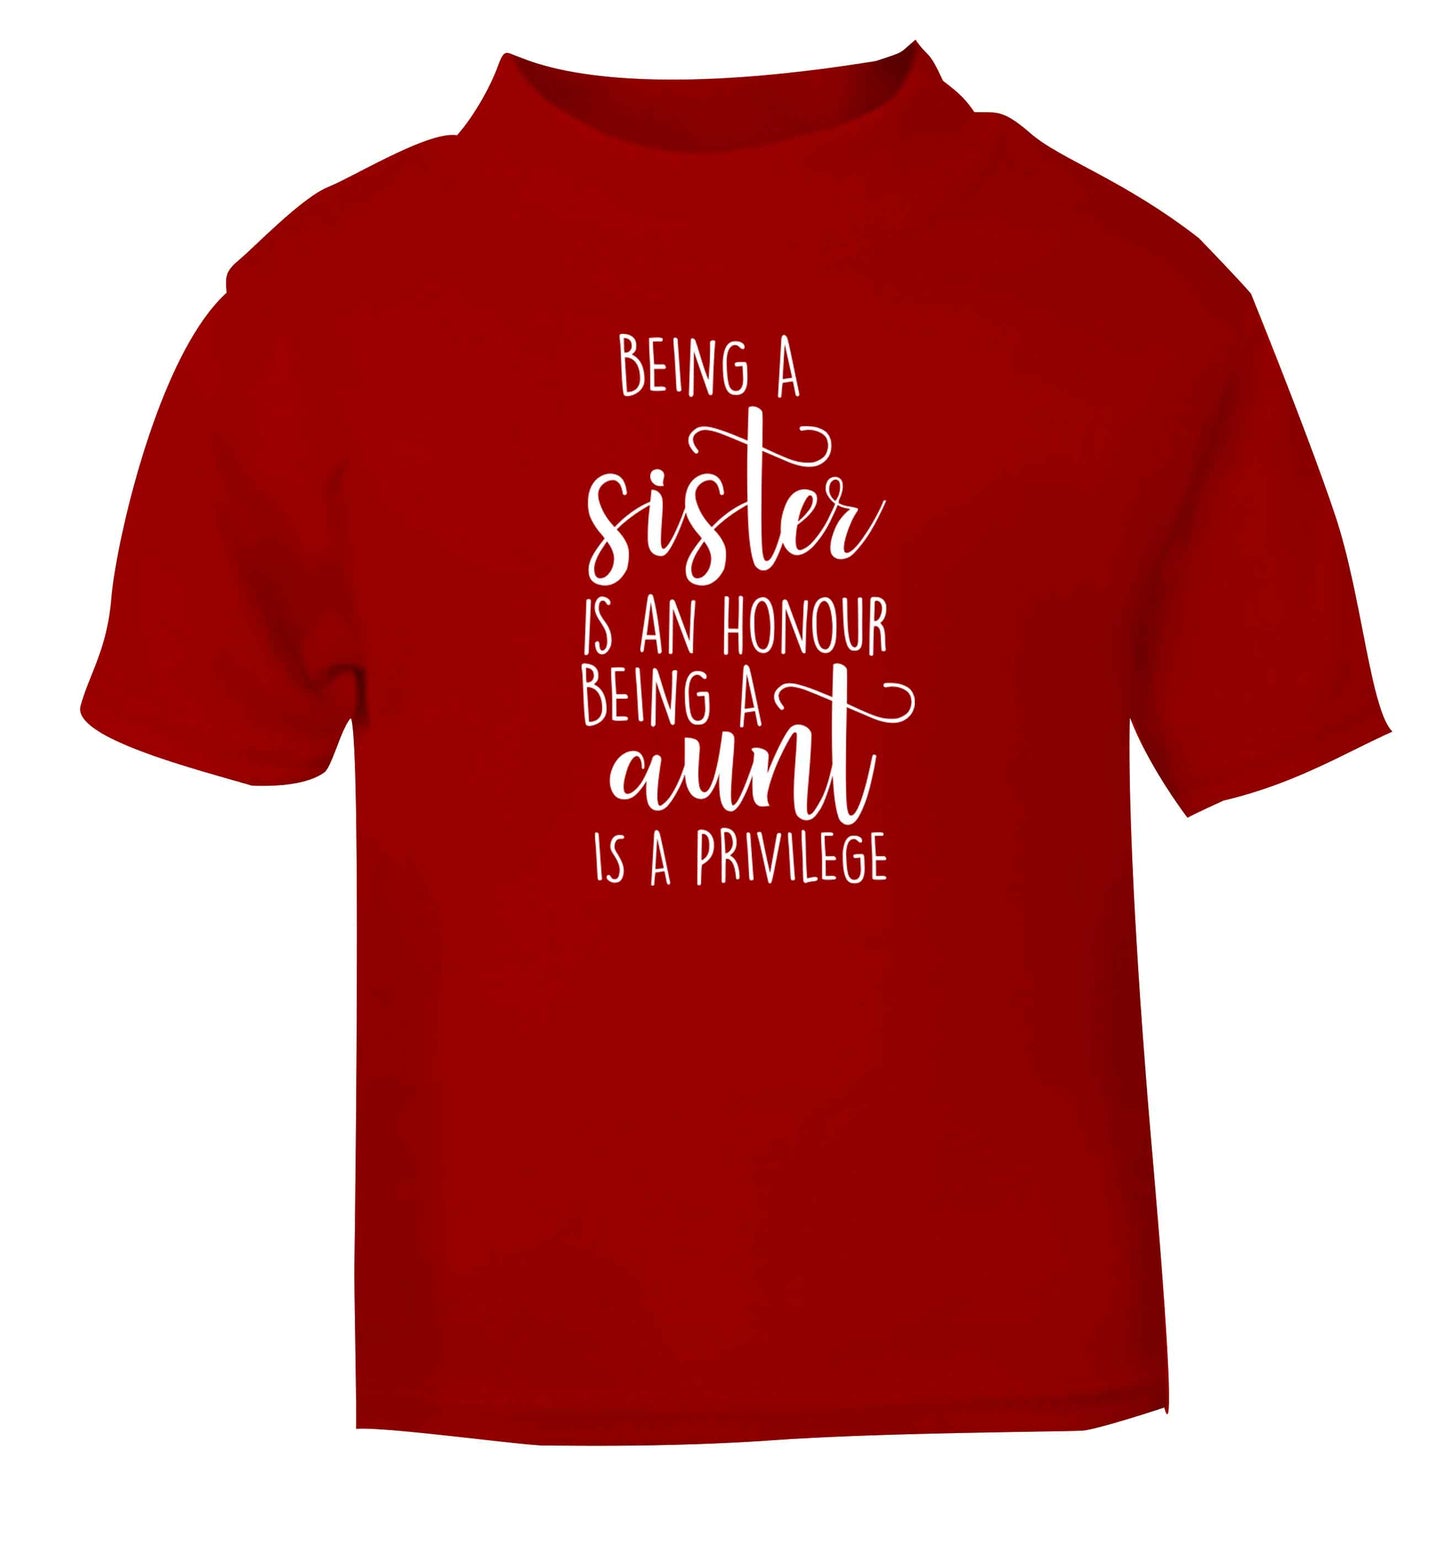 Being a sister is an honour being an auntie is a privilege red Baby Toddler Tshirt 2 Years